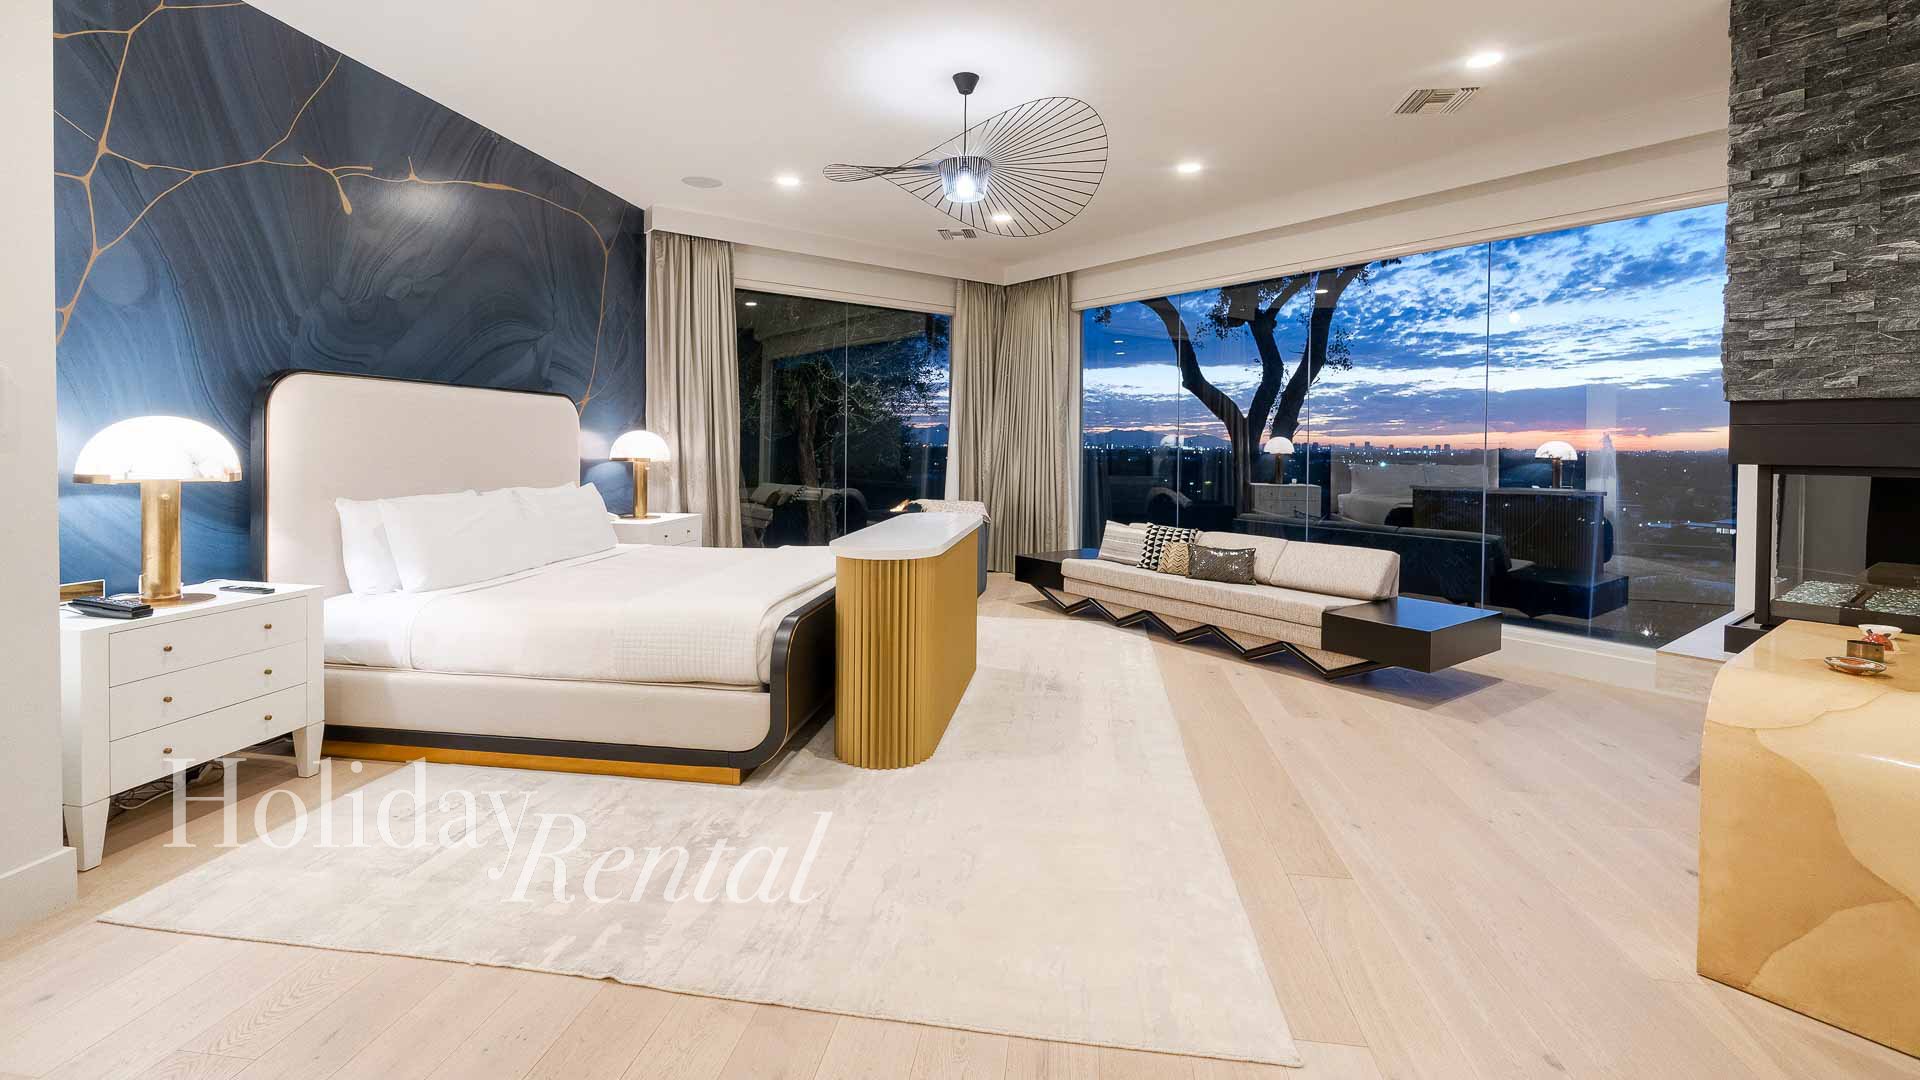 Master Bedroom - King Bed with amazing views